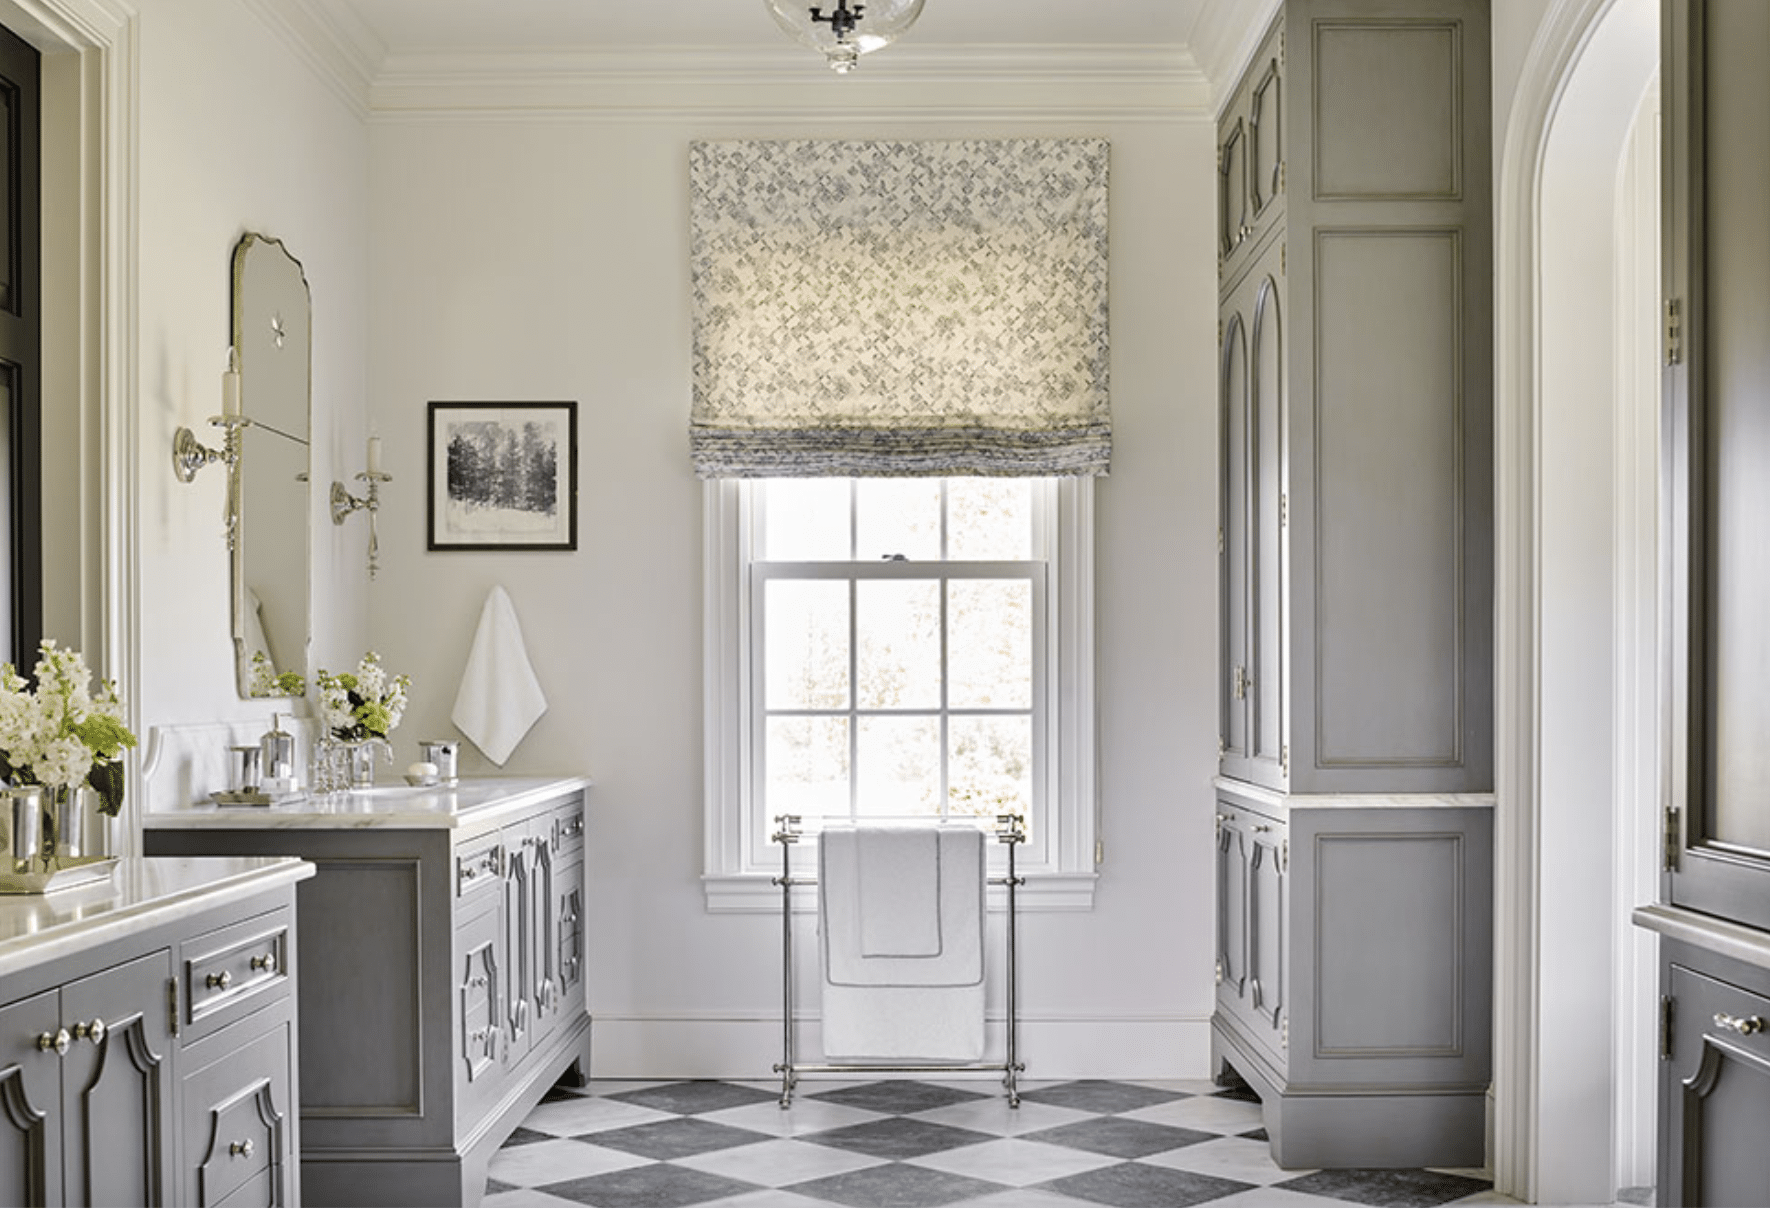 Barbara Westbrook Interior Design | Emily Followill Photography - house tour - Tennessee farmhouse - farmhouse - bathroom - bathroom decor - bathroom ideas - marble floors - black and white marble floors